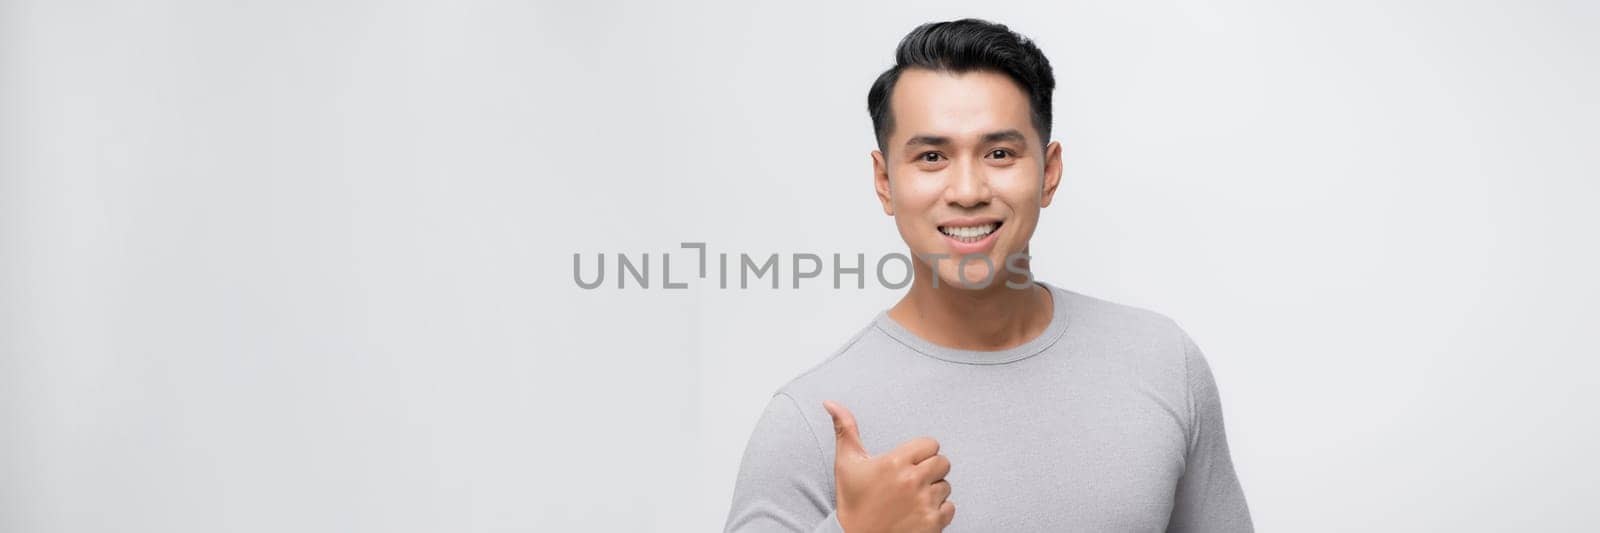 Happy man giving thumbs up sign on white banner background by makidotvn